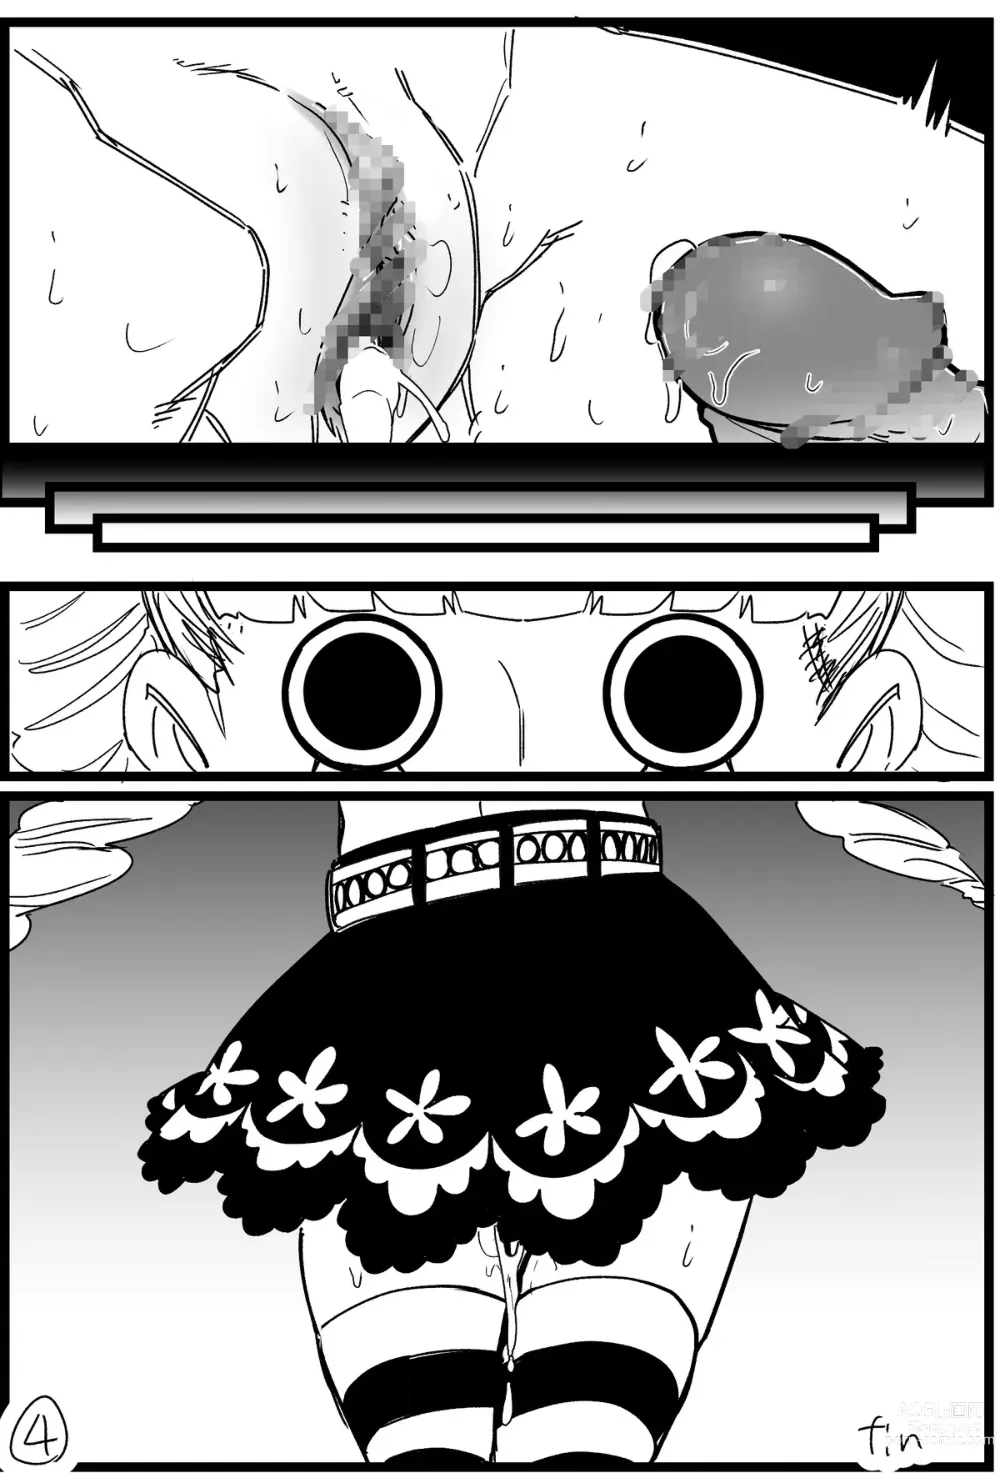 Page 4 of doujinshi A Silent Manga About Unconscious Perona Getting Creampied